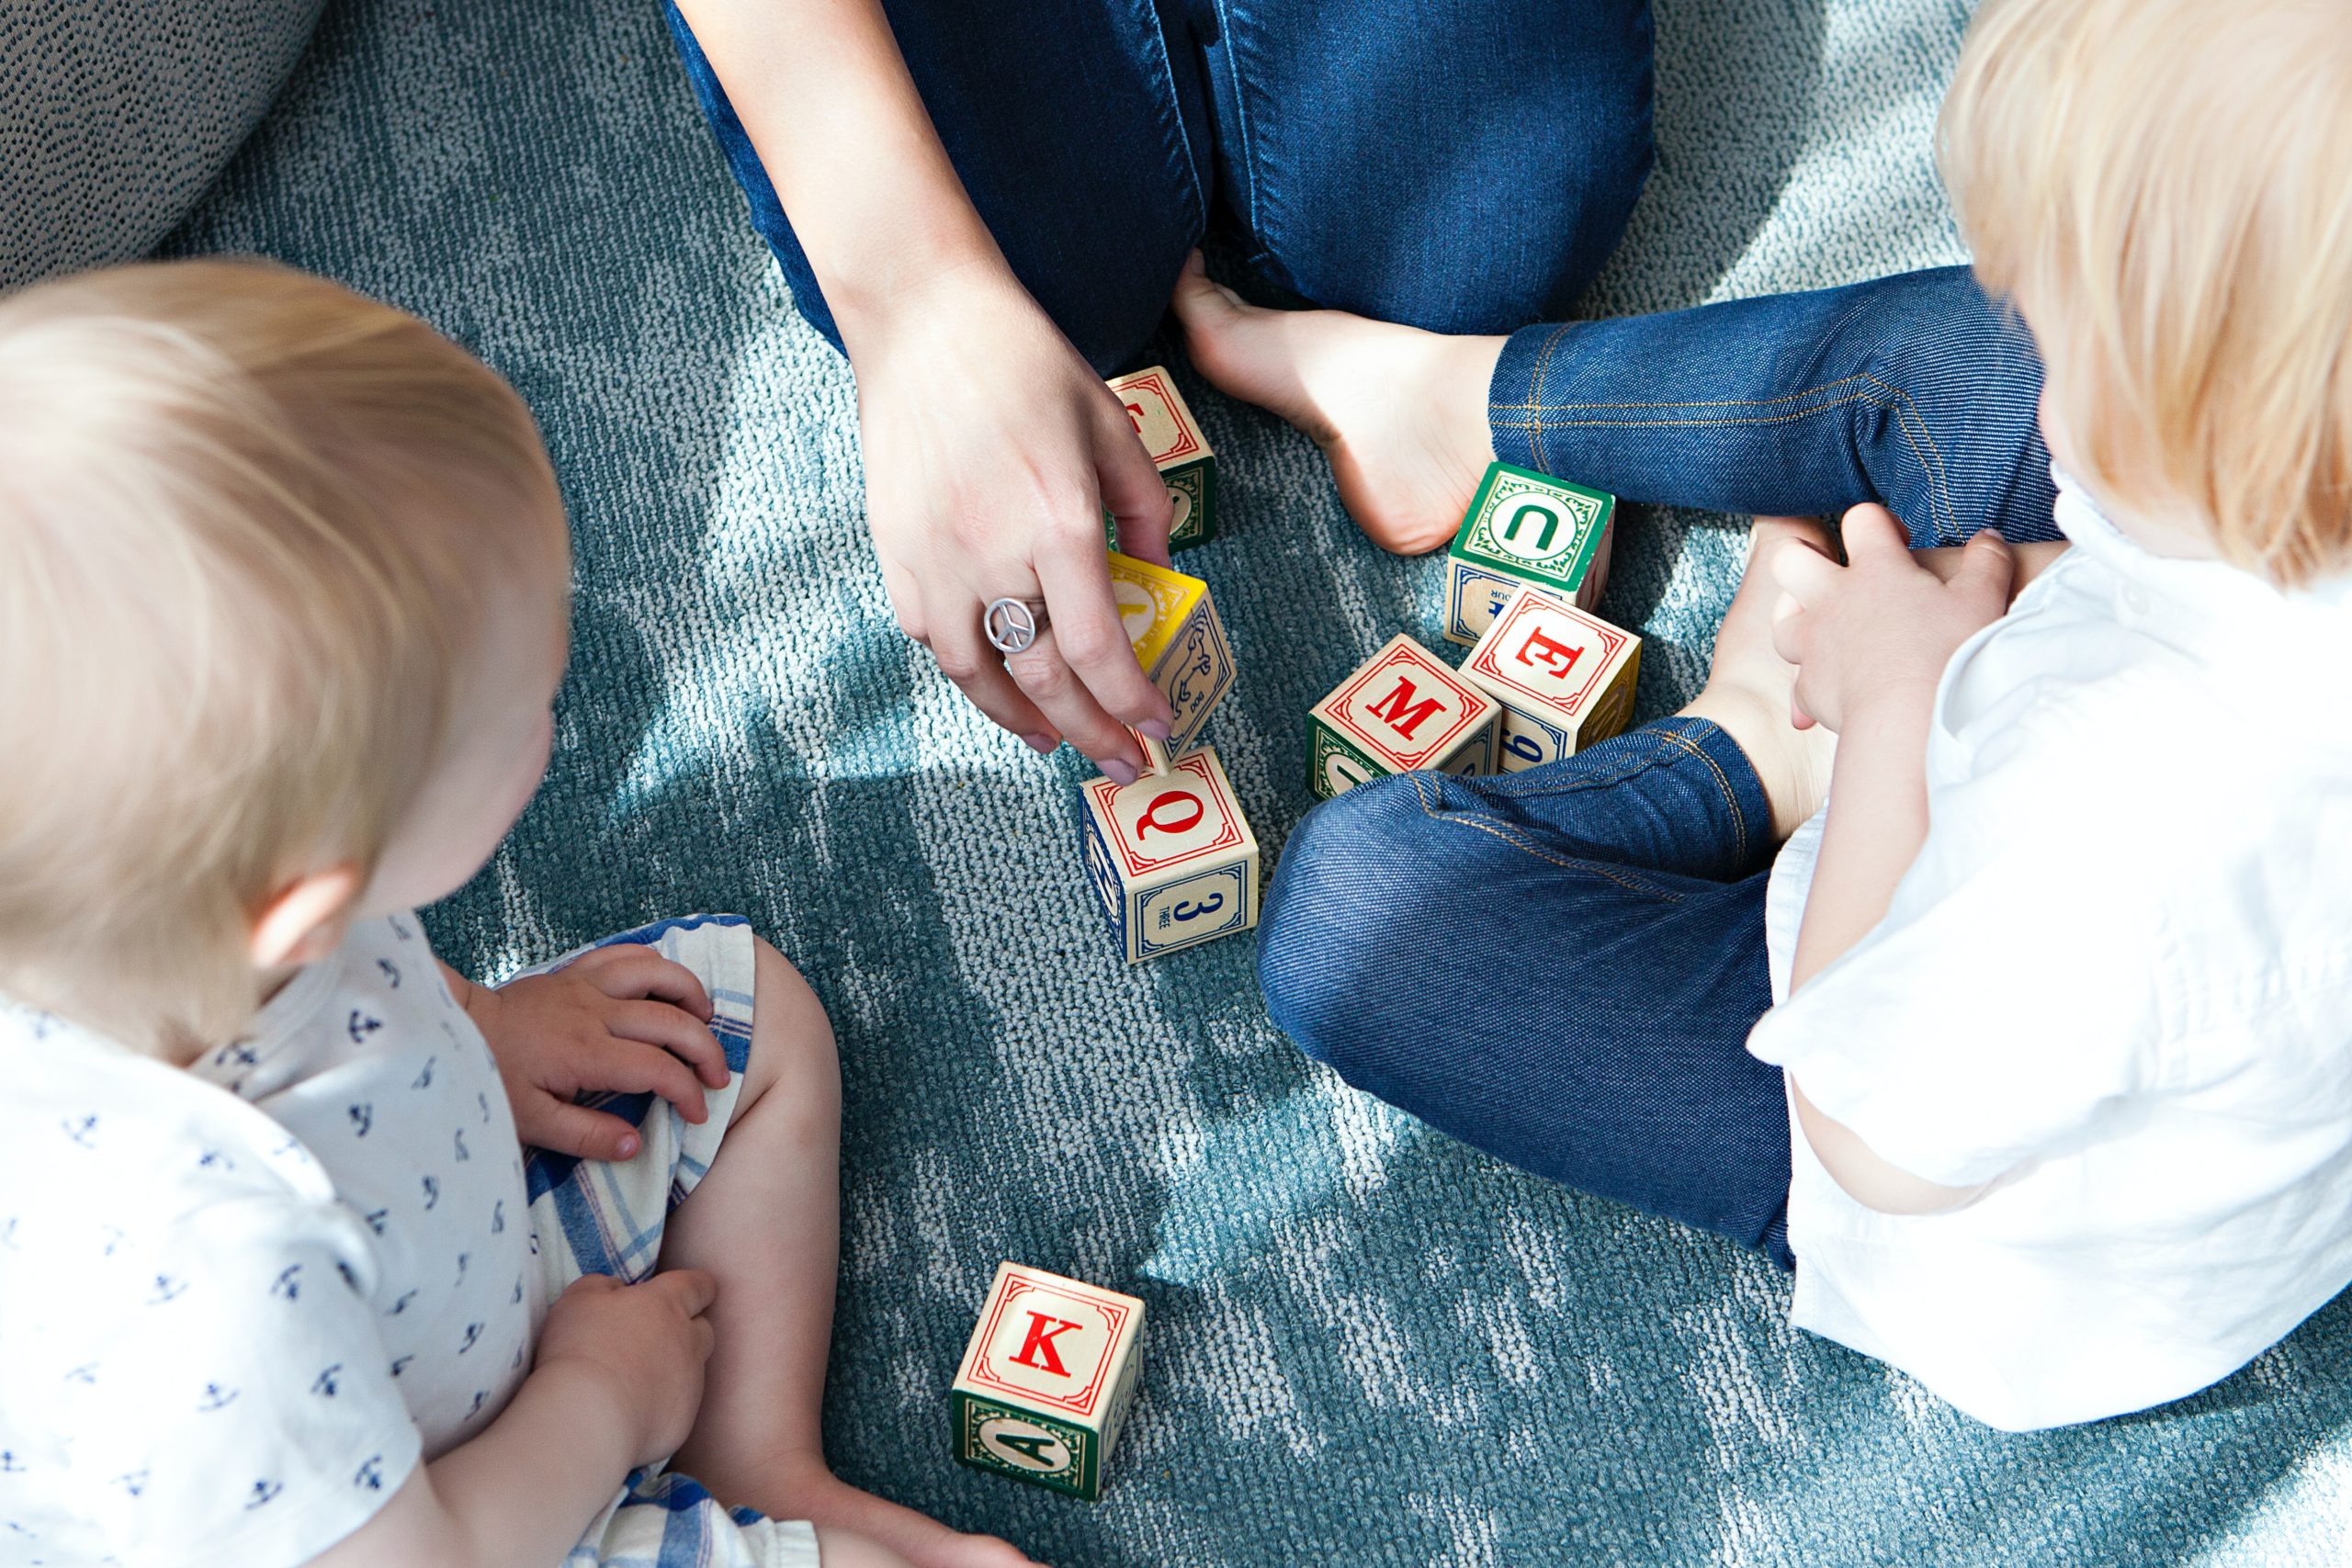 Children playing with blocks, family